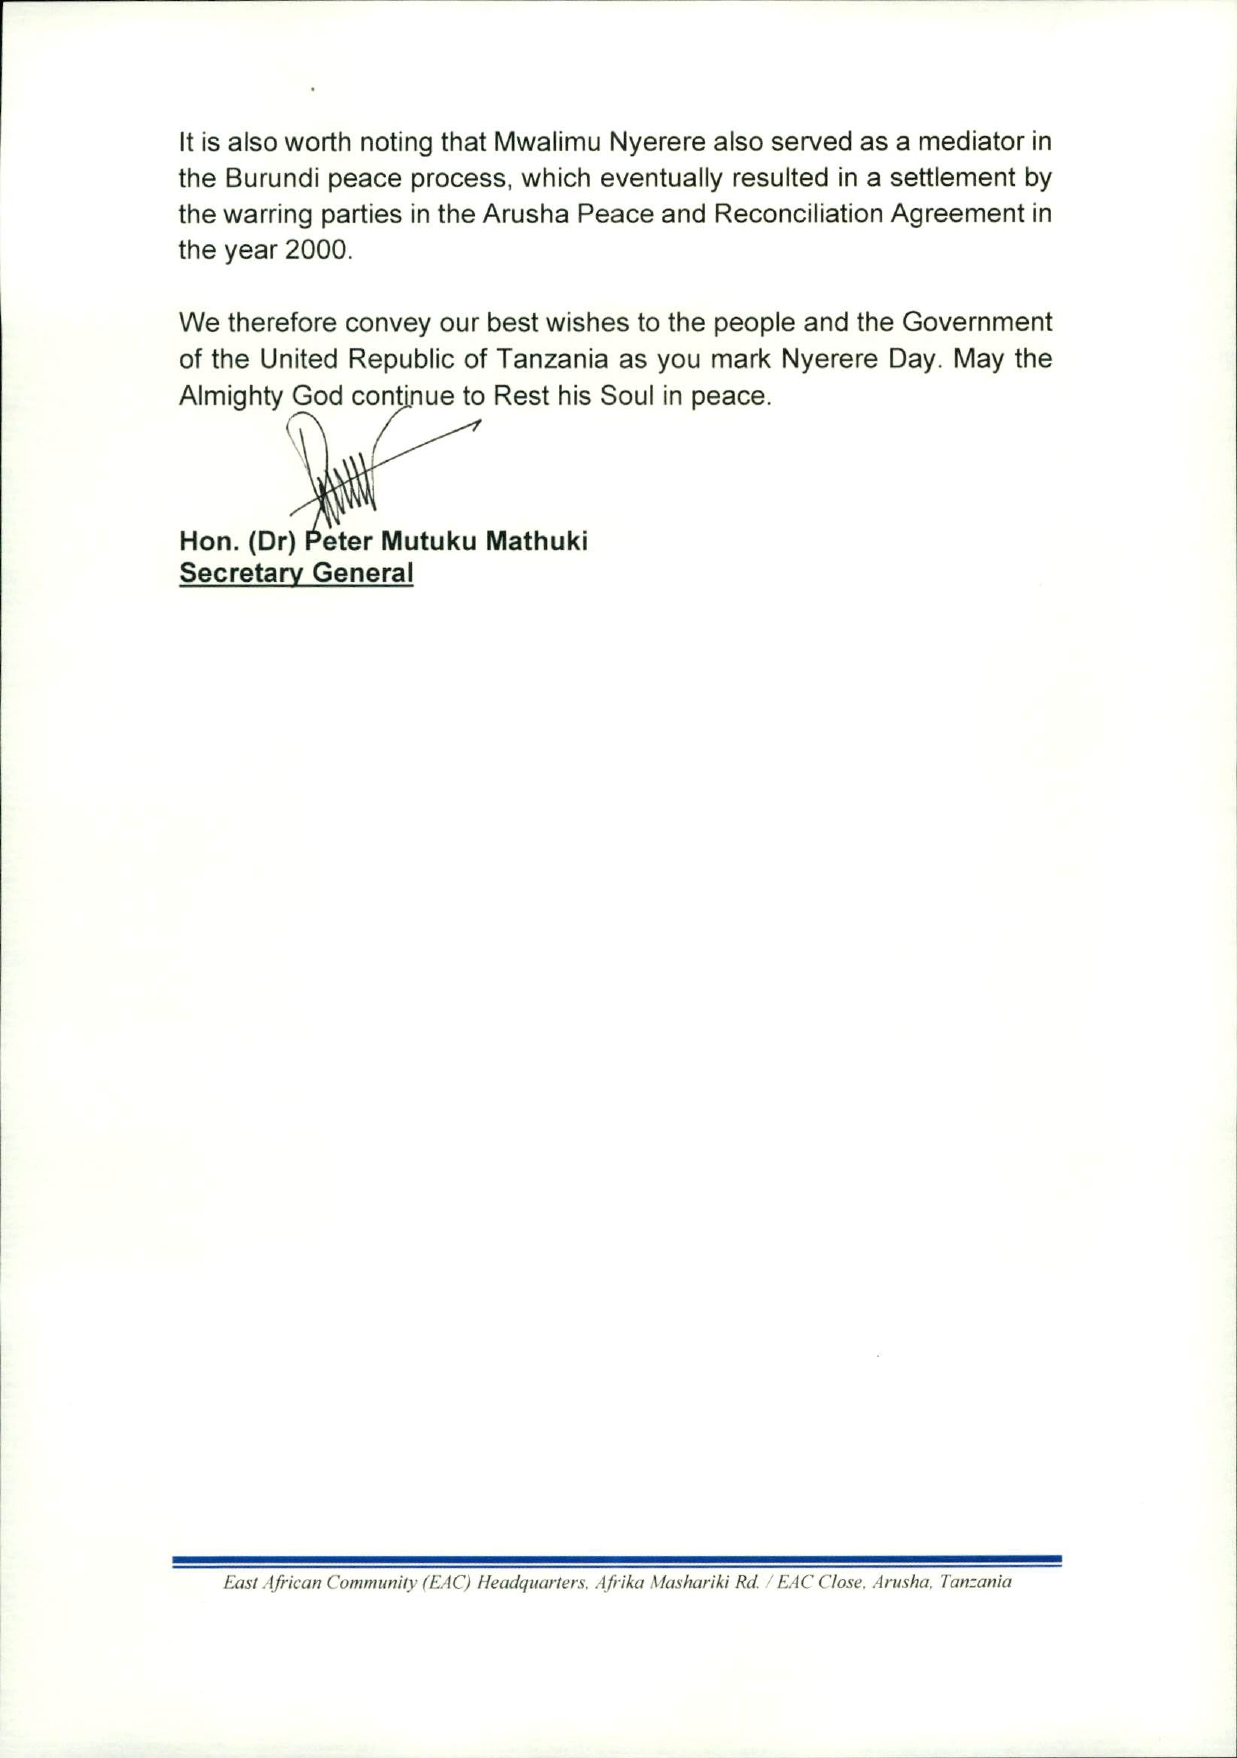 Message of Goodwill to URT on Nyerere Day1 page 0002